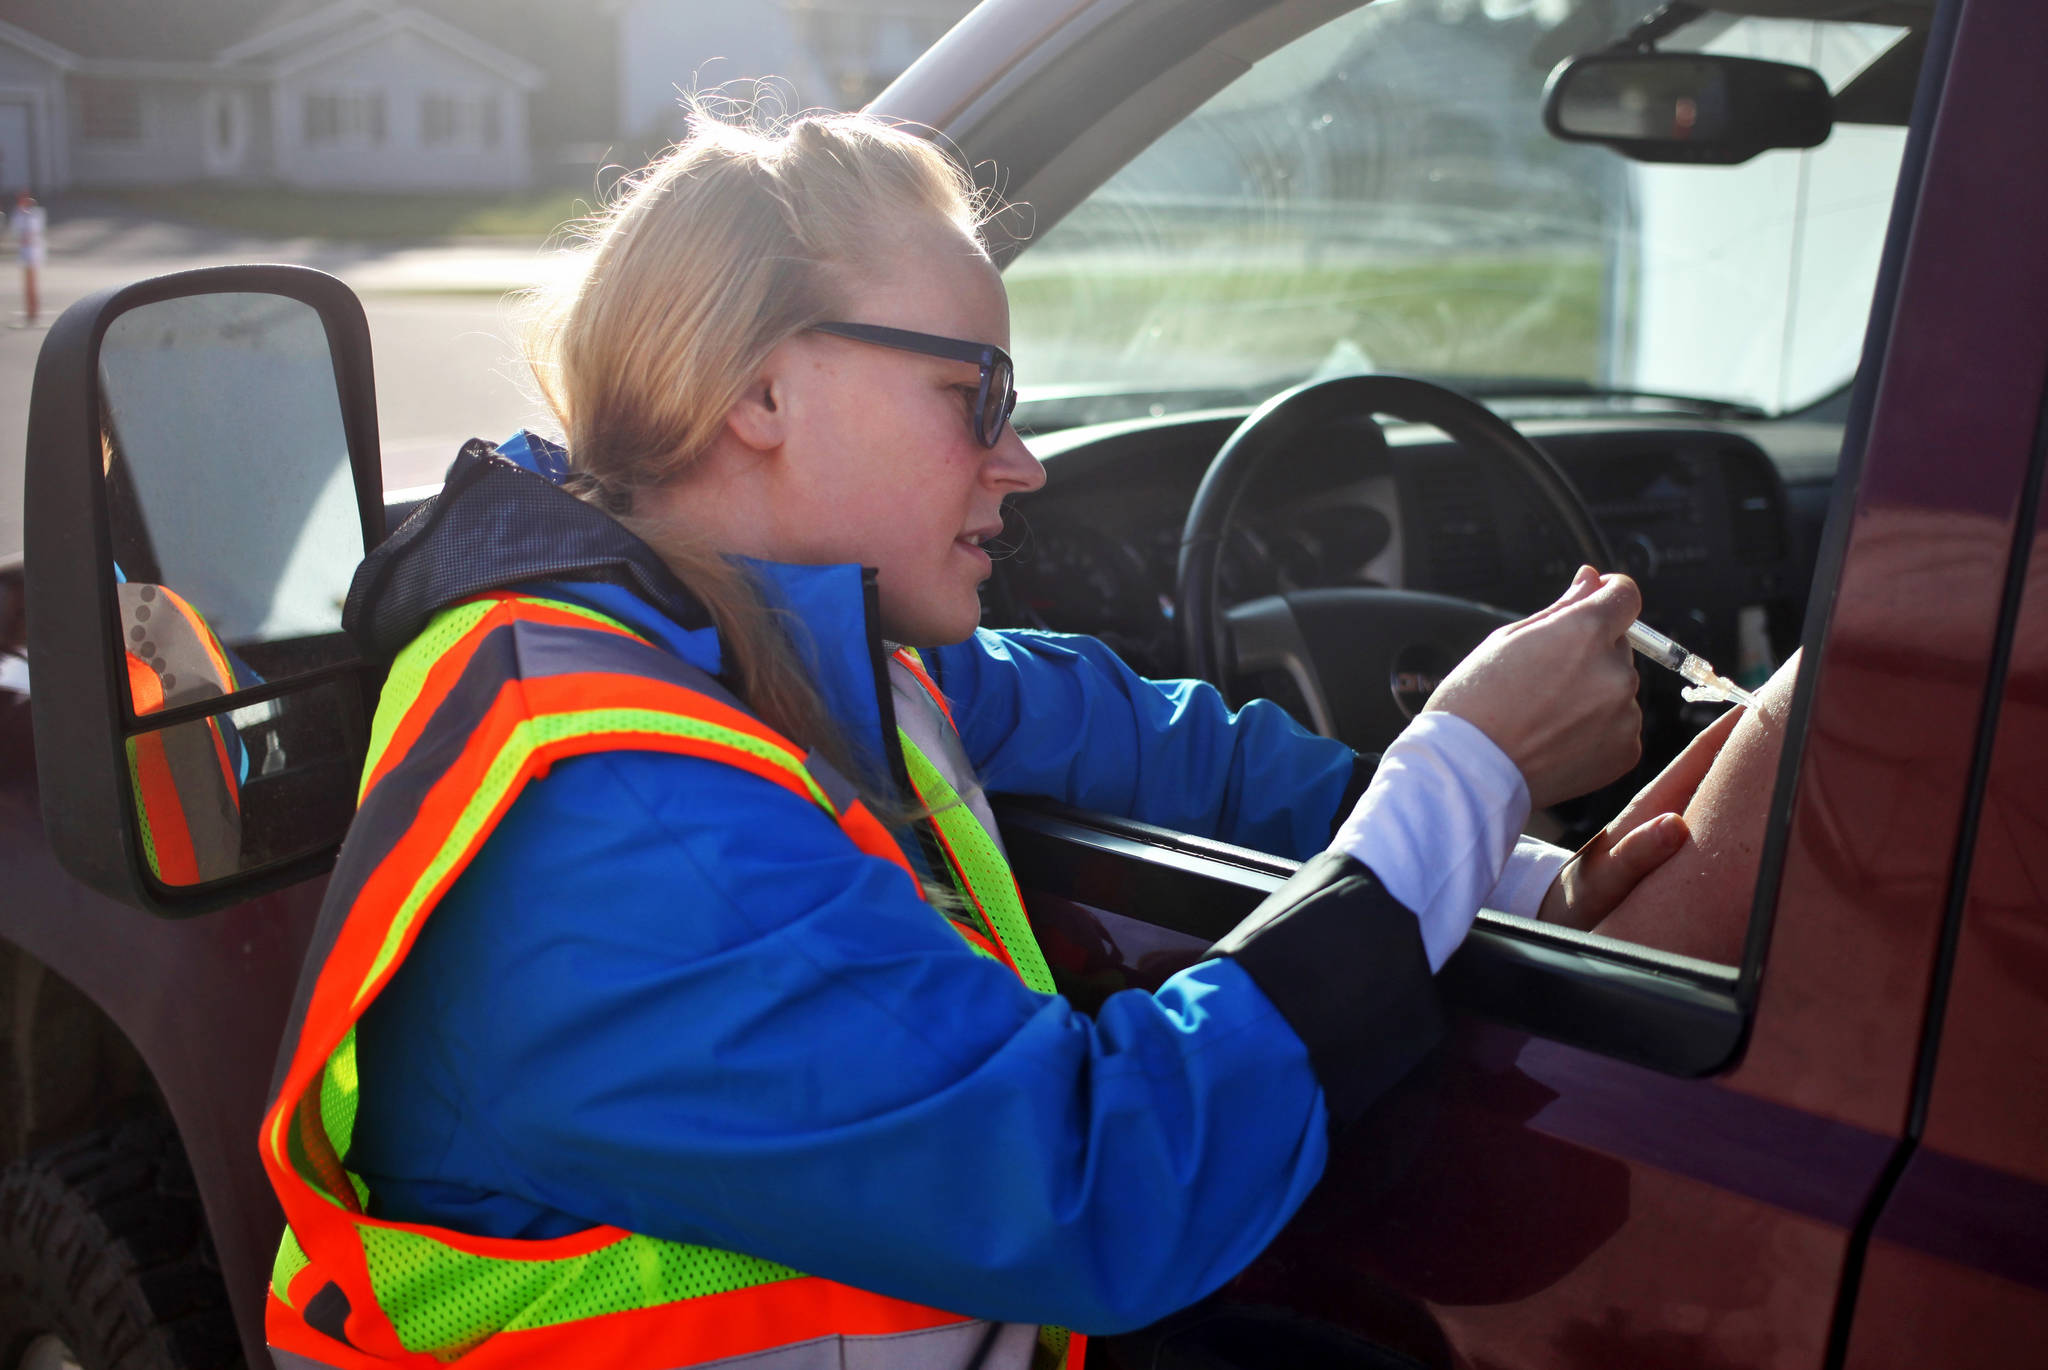 Student nurse Jana Cooper gives a flu shot through the window of a truck during Central Peninsula Hospital’s annual free drive-through flu vaccine clinic on Wednesday in Soldotna. Normally held in the Central Peninsula Hospital parking lot, this year’s event was down the street at Soldotna’s Our Lady of Perpetual Help Catholic Church, due to paving work in the hospital lot. In past years, student nurses have given over 400 shots at the clinic, and this year’s turnout seemed similarly large. Before the event began at 3 p.m, cars were lined up down the block as far as Rockwell Lane. (Photo by Ben Boettger/Peninsula Clarion)